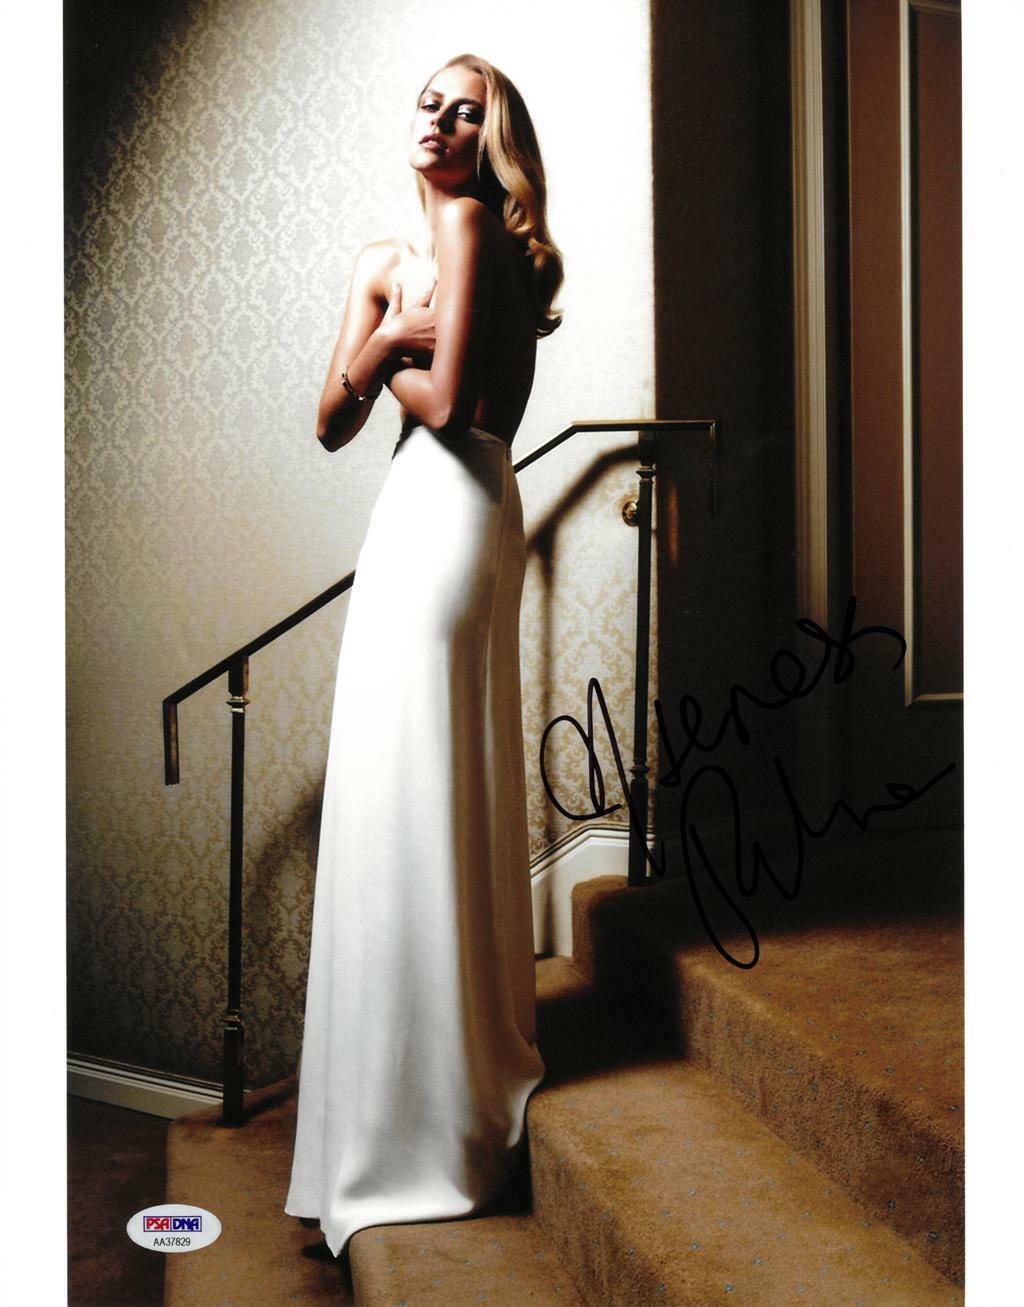 Teresa Palmer Signed Sexy Authentic Autographed 11x14 Photo Poster painting PSA/DNA# AA37829